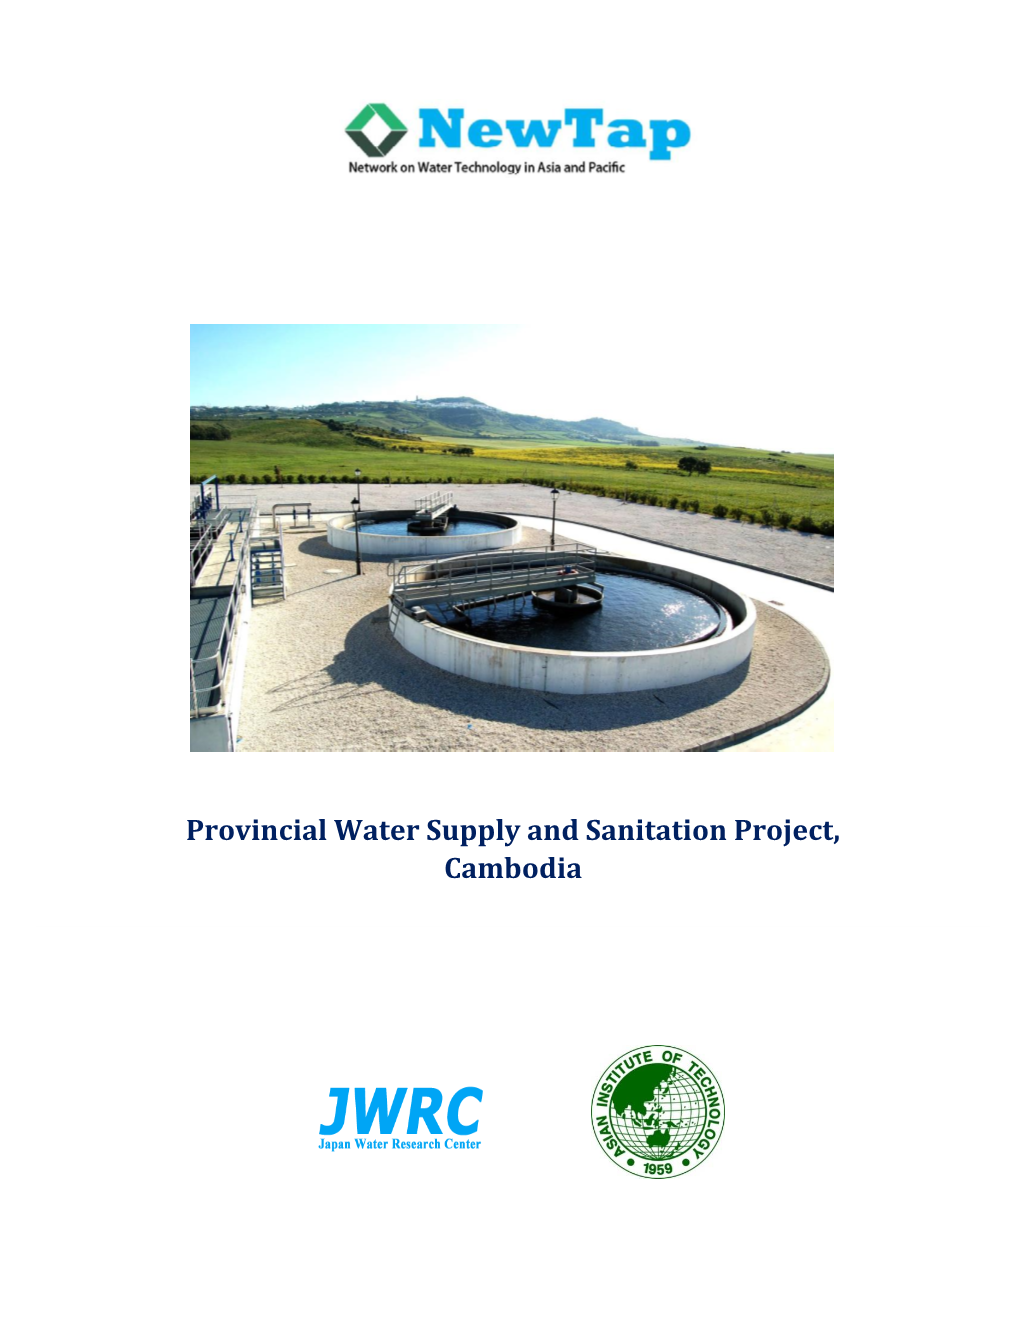 Provincial Water Supply and Sanitation Project, Cambodia